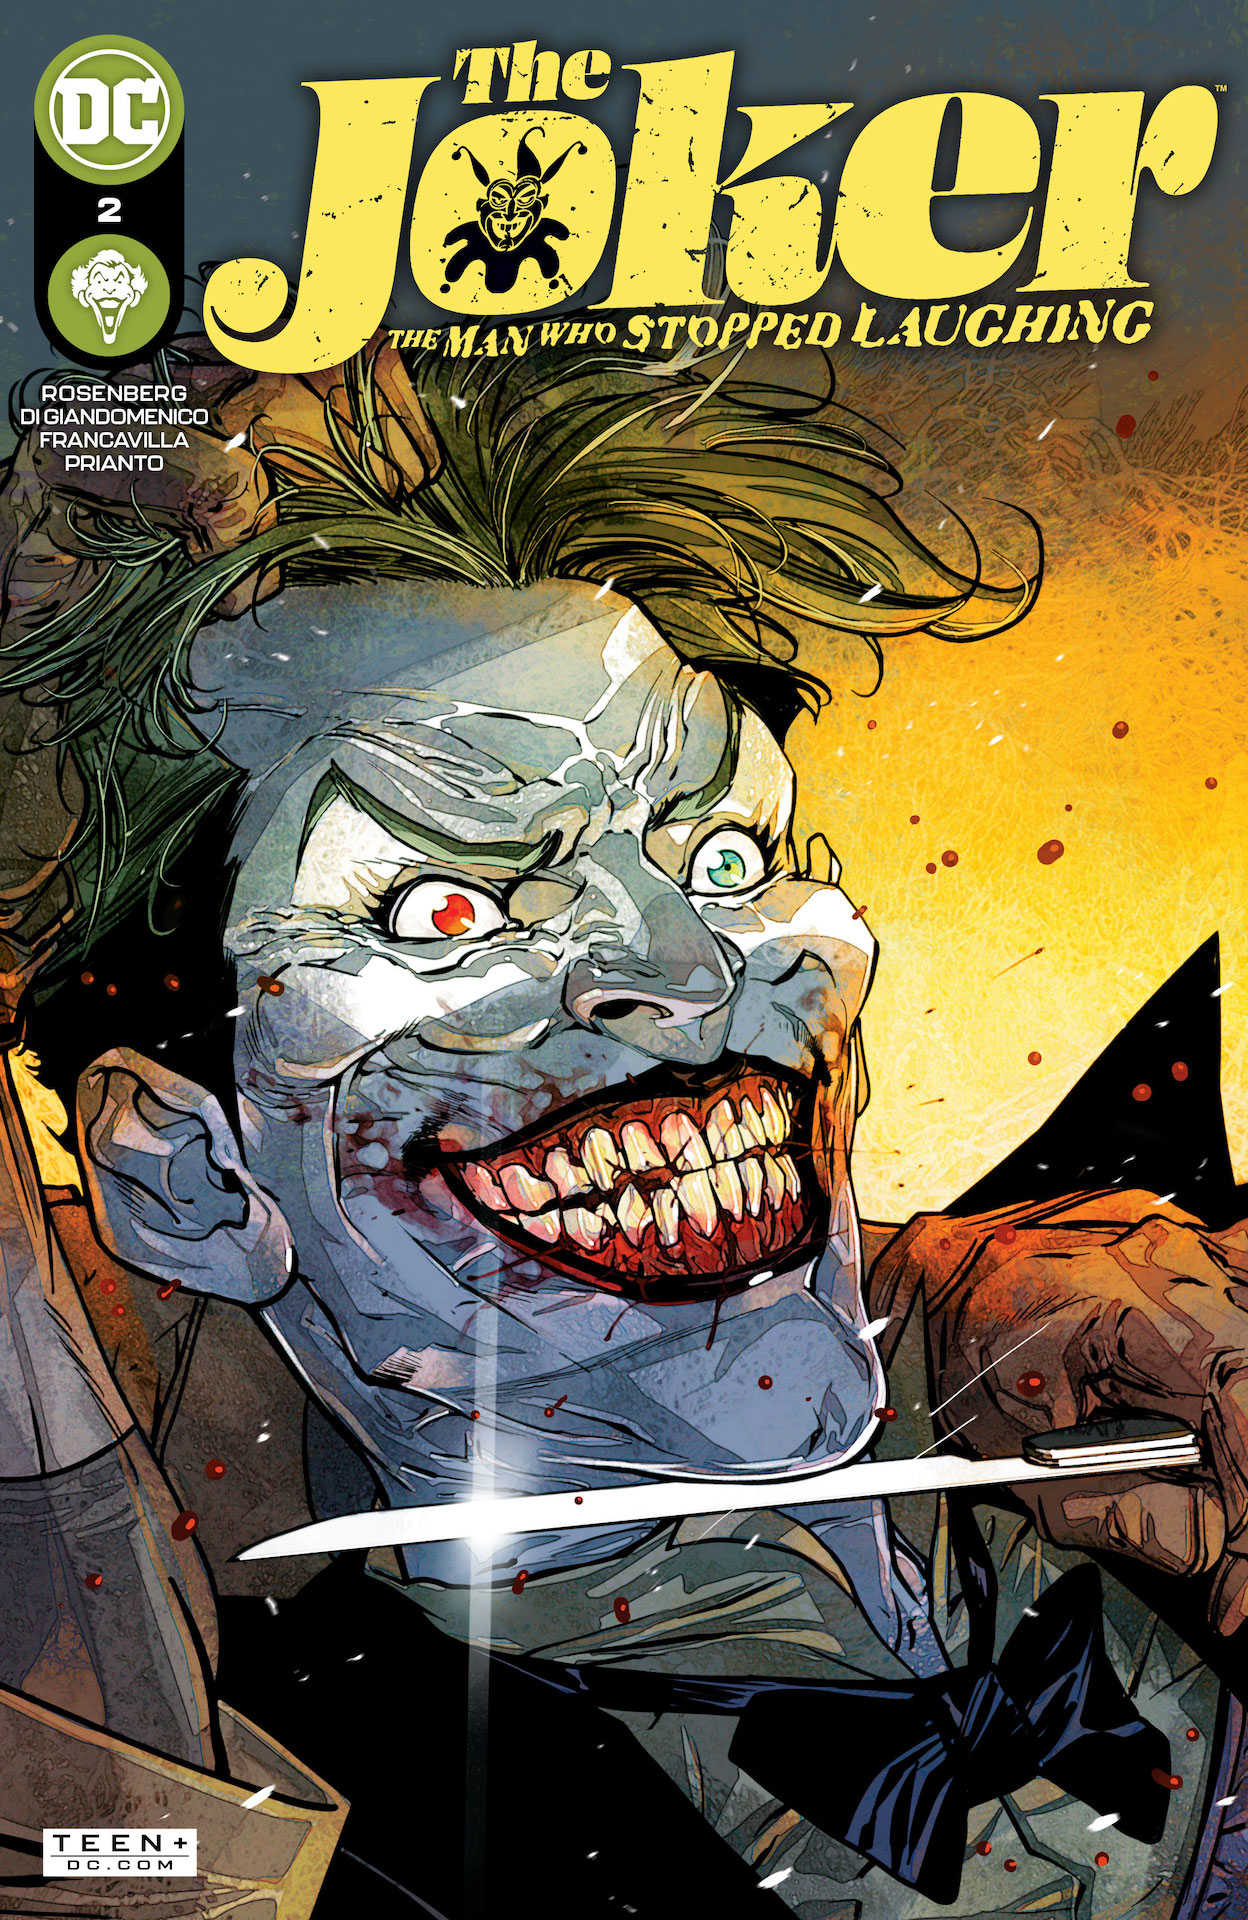 DC Preview: The Joker: The Man Who Stopped Laughing #2